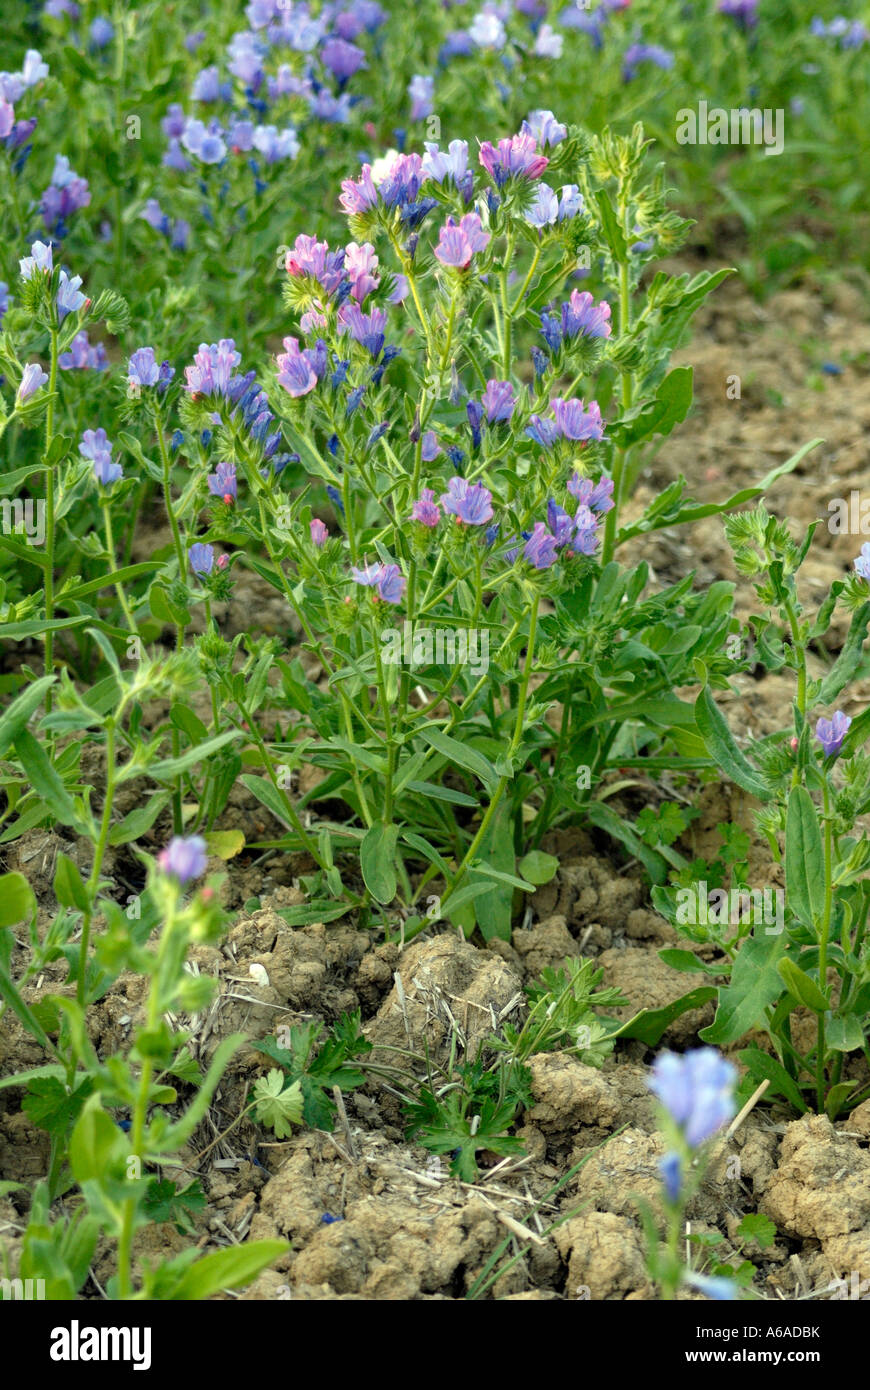 Plant and blue flowers of bugloss Echium species growing as a crop Stock Photo